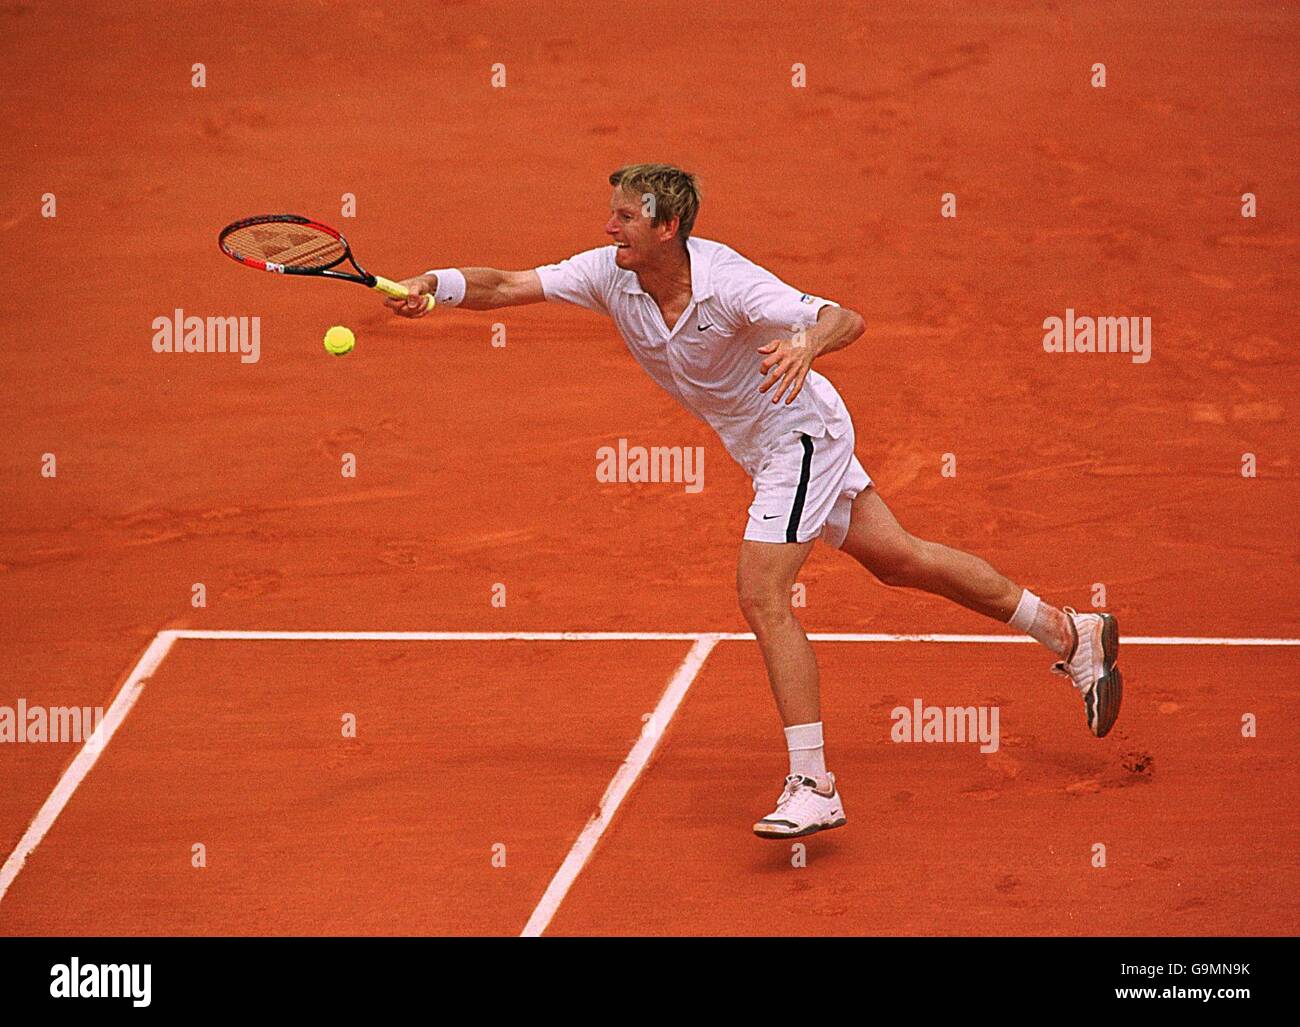 Tennis French Open Quarter Finals Stock Photo Alamy